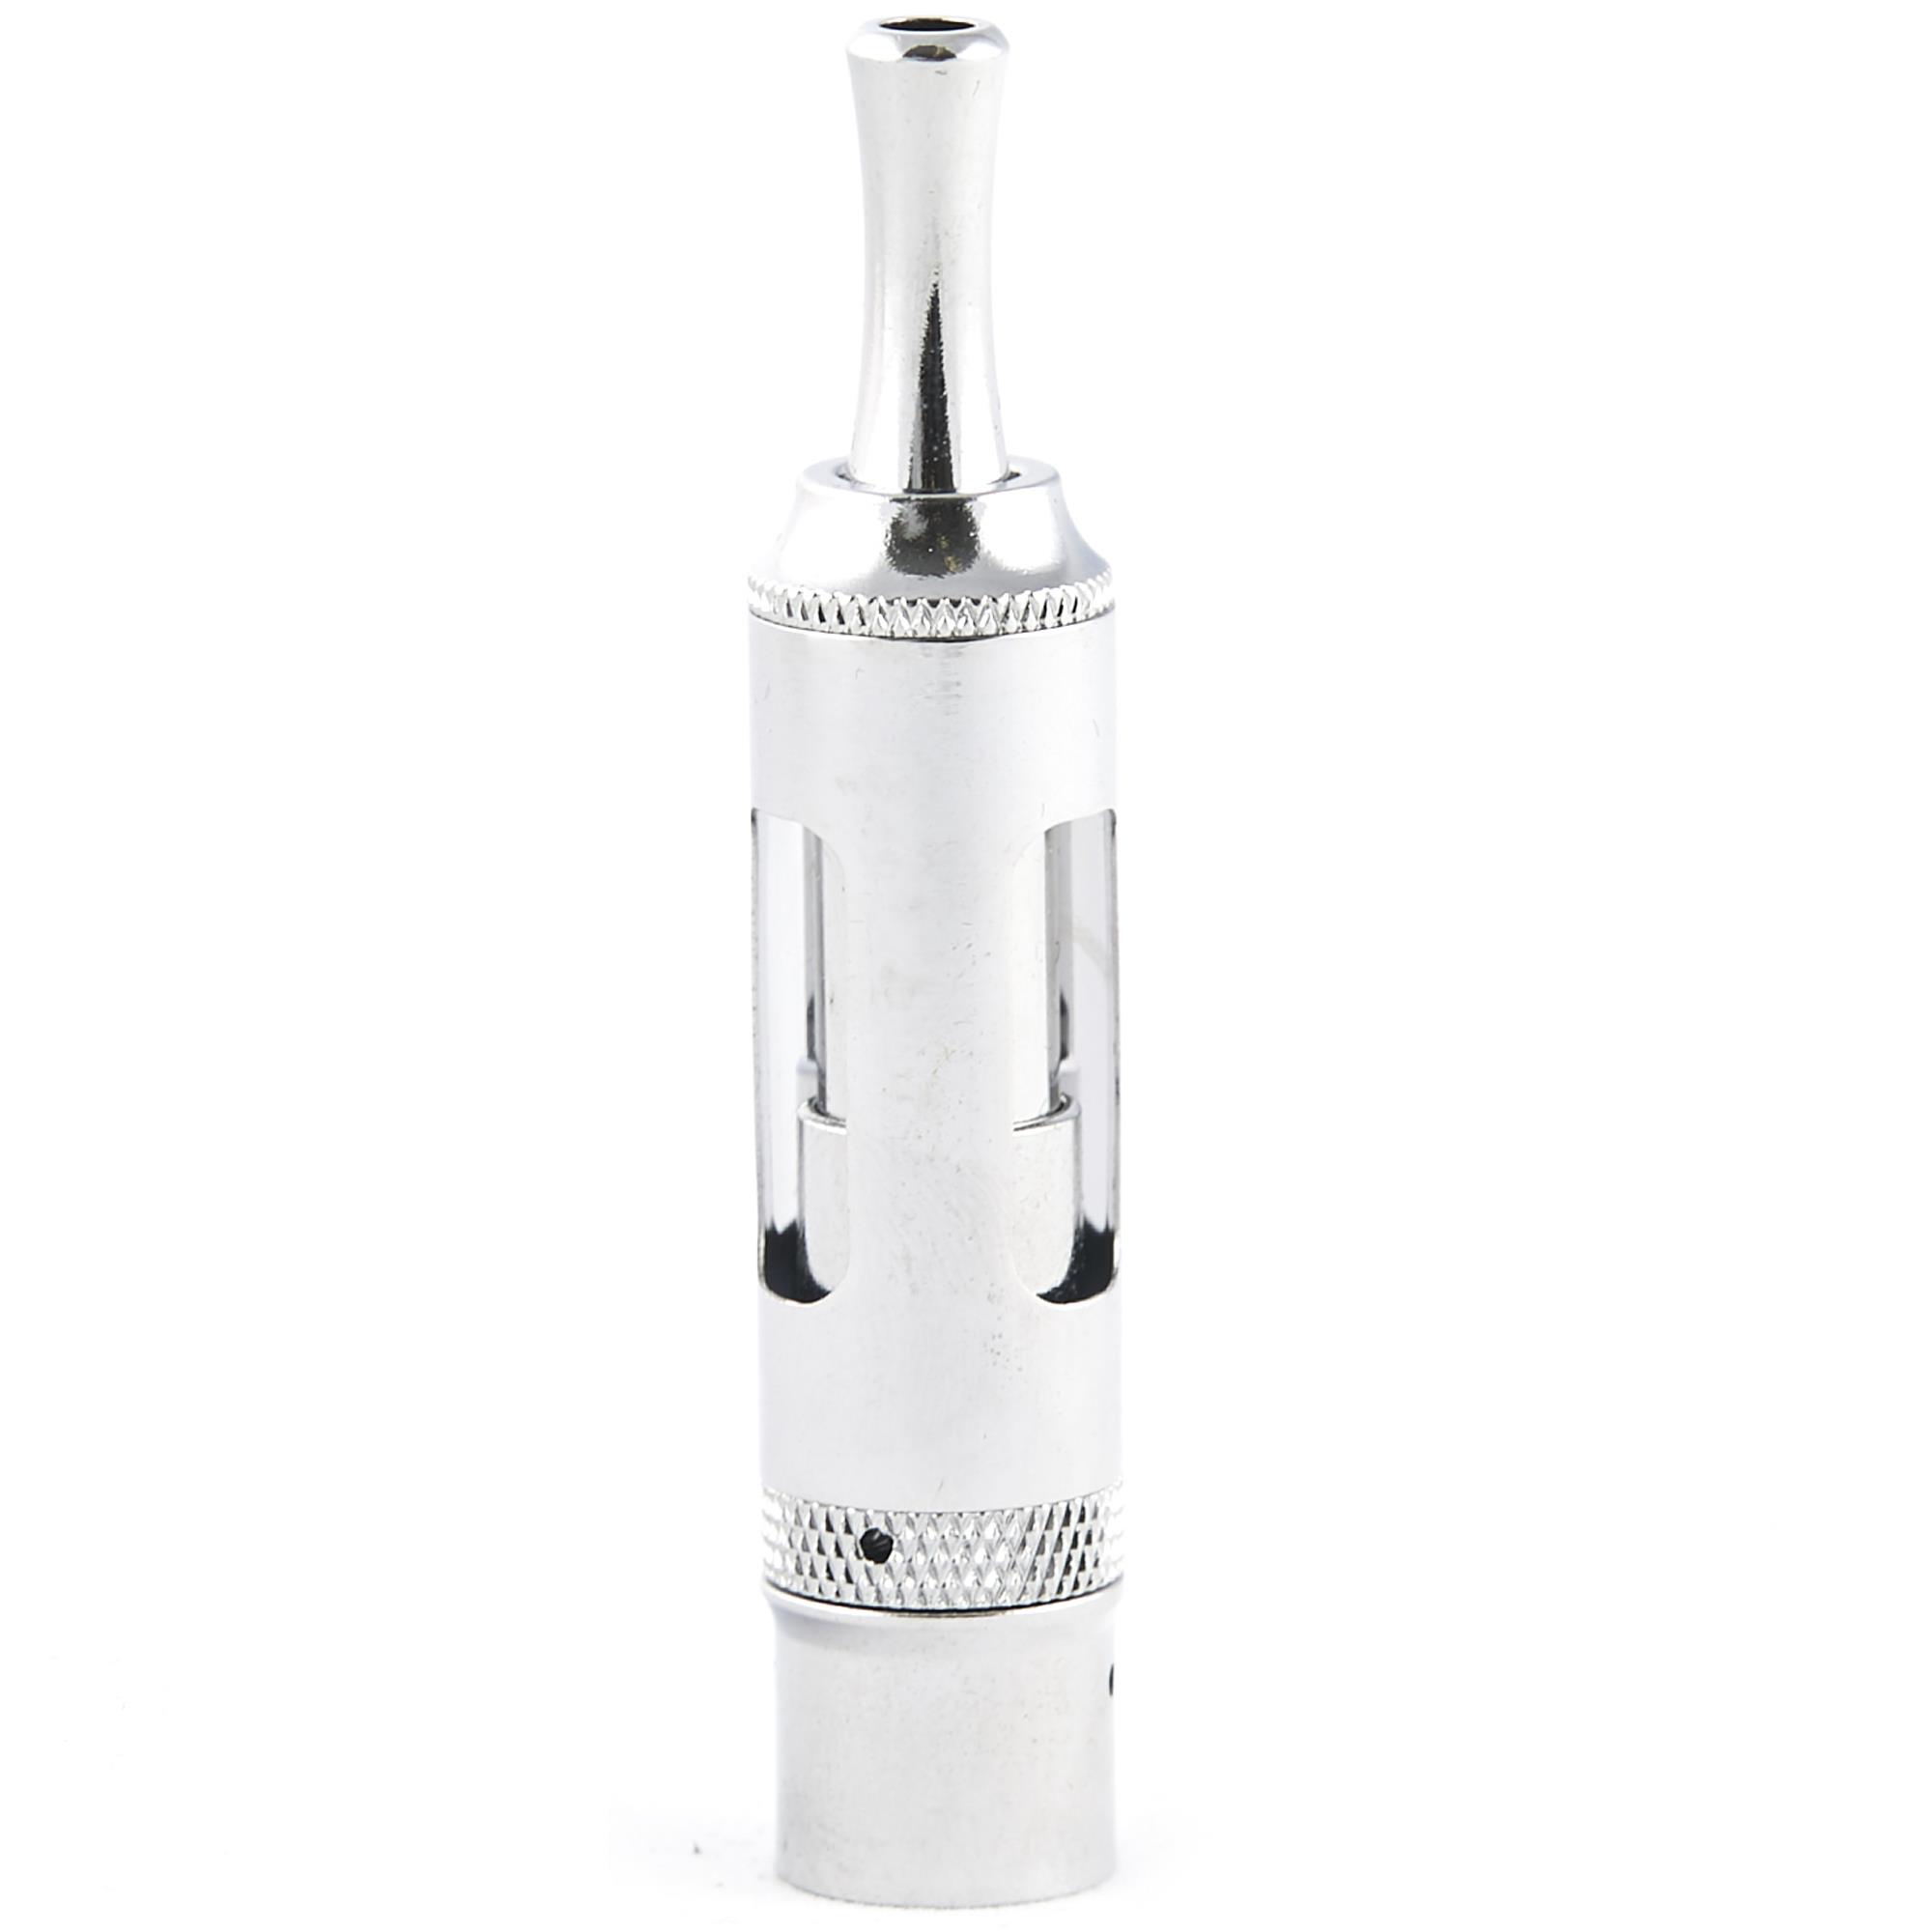 IBLISS TORCH ATOMIZER